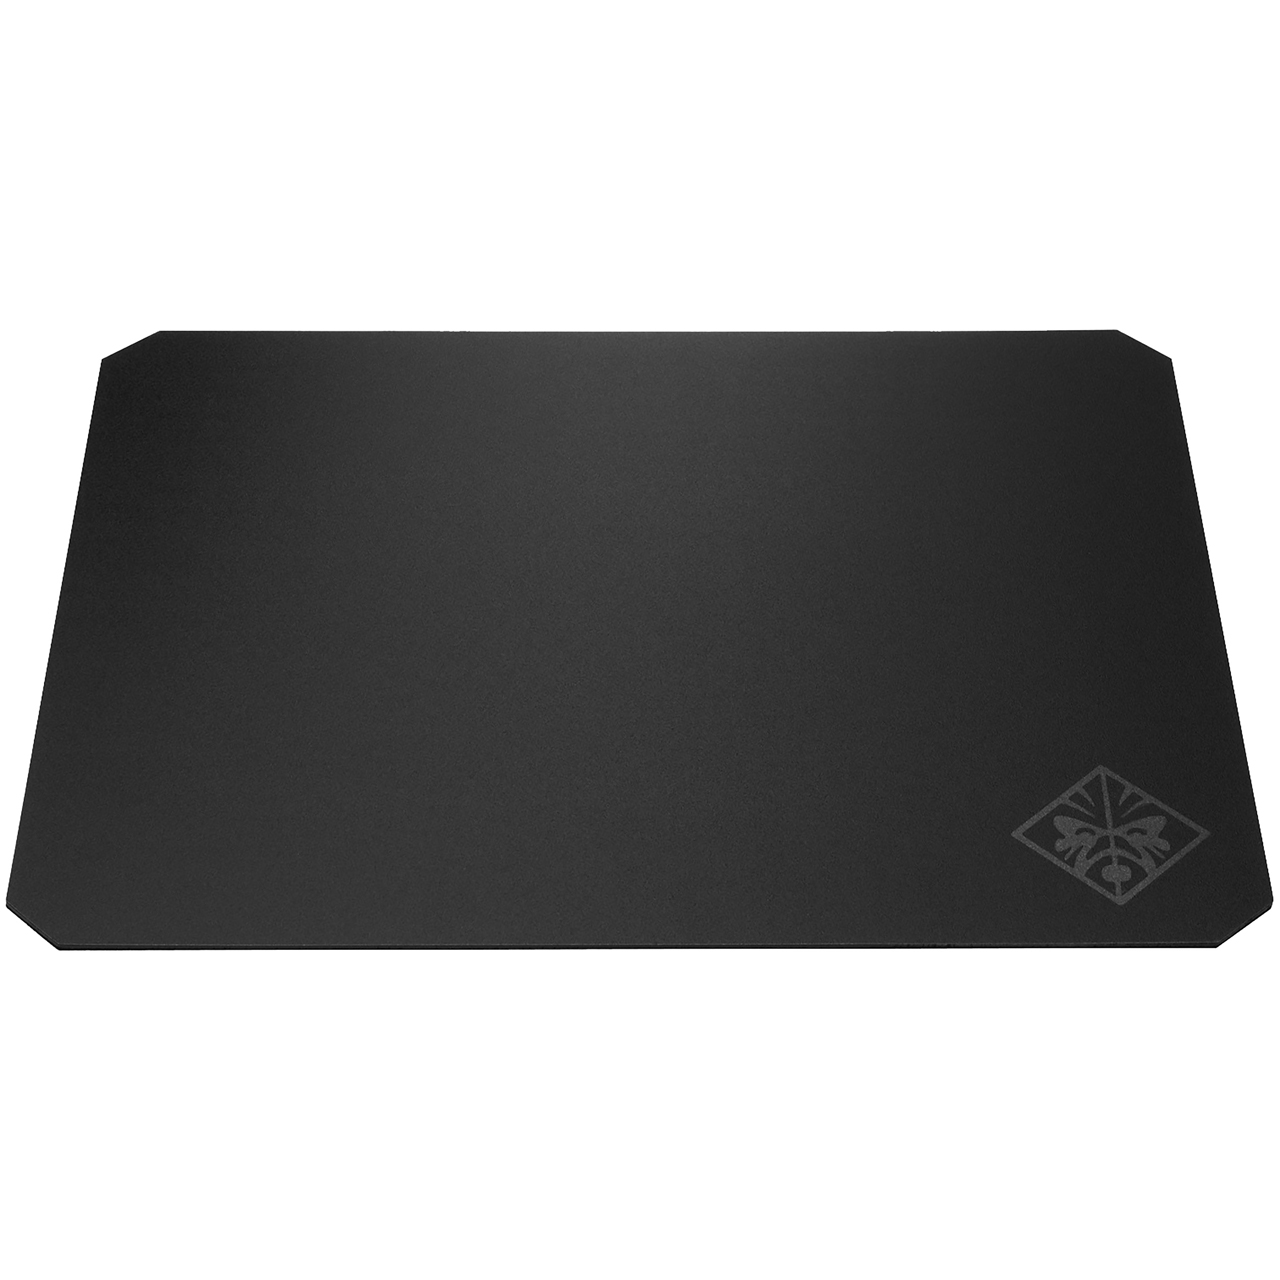 HP OMEN Mouse Pad 200 Review